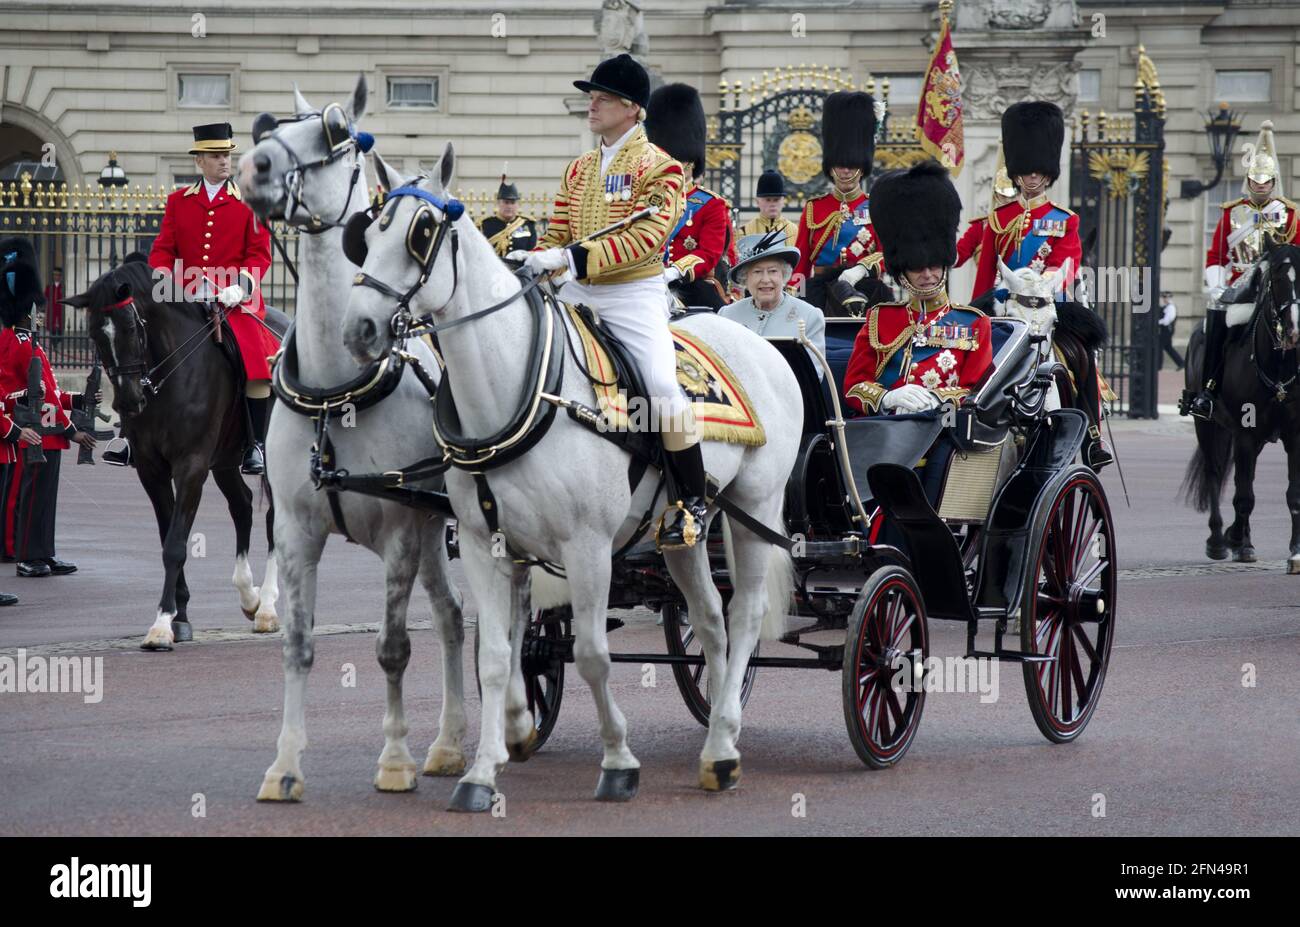 Queen Elizabeth II Duke of Edinburgh (military uniform) in Open Carriage accompanied by Prince Charles Prince William and Prince Edward Duke of Kent Stock Photo